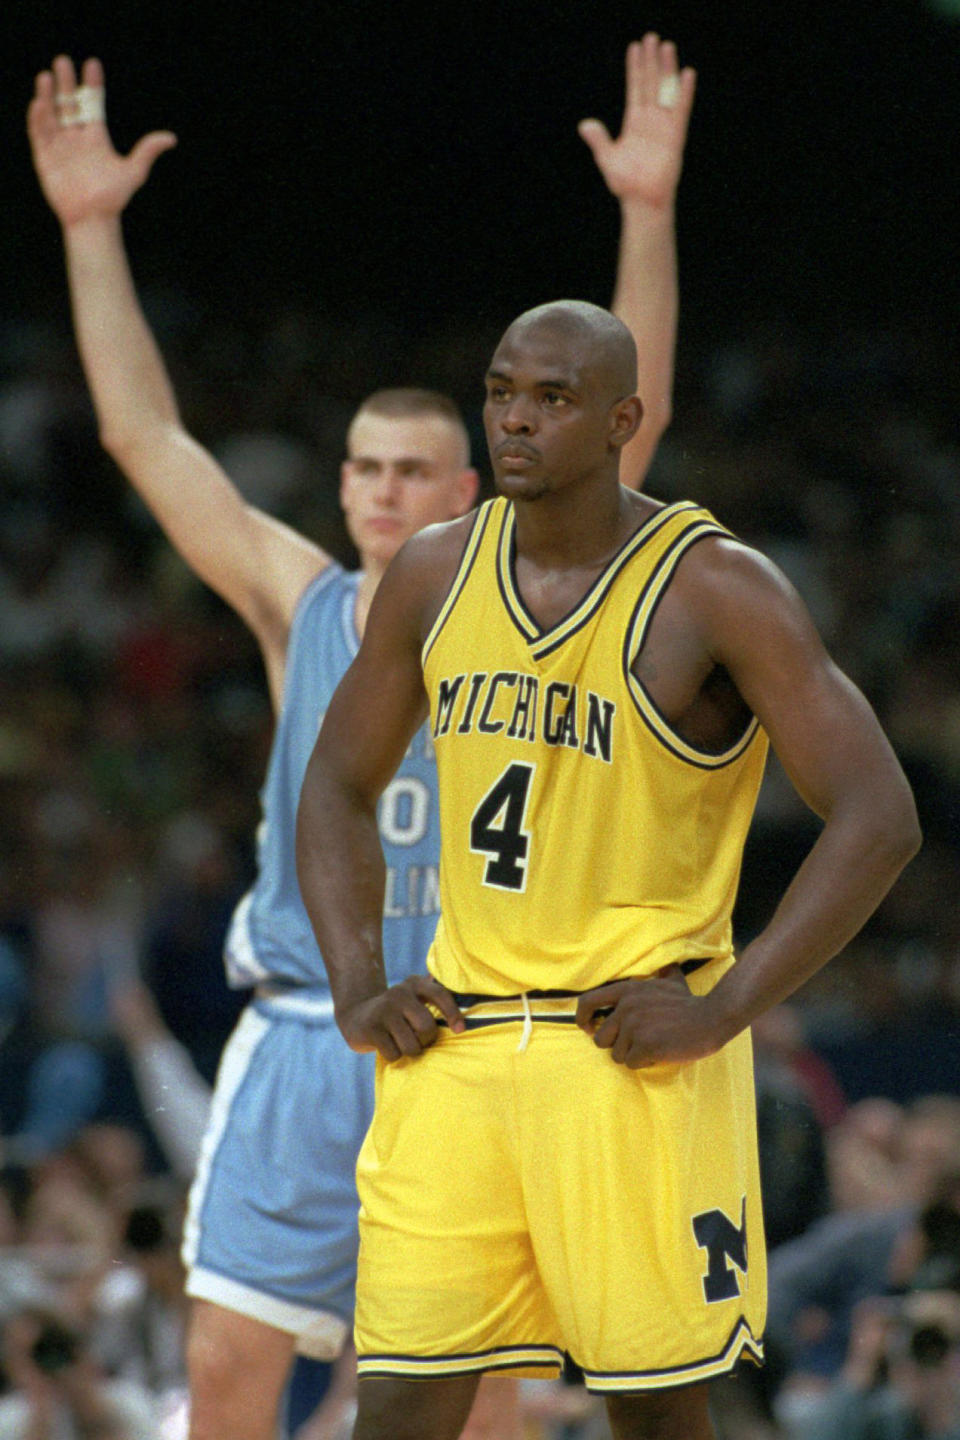 FILE - Michigan's Chris Webber (4) stands by as North Carolina's Eric Montross celebrates during North Carolina's technical foul shots in the final seconds of the NCAA Final Four championship game at the Superdome in New Orleans, April 5, 1993. North Carolina won the national title 77-71. (AP Photo/Susan Ragan, File)